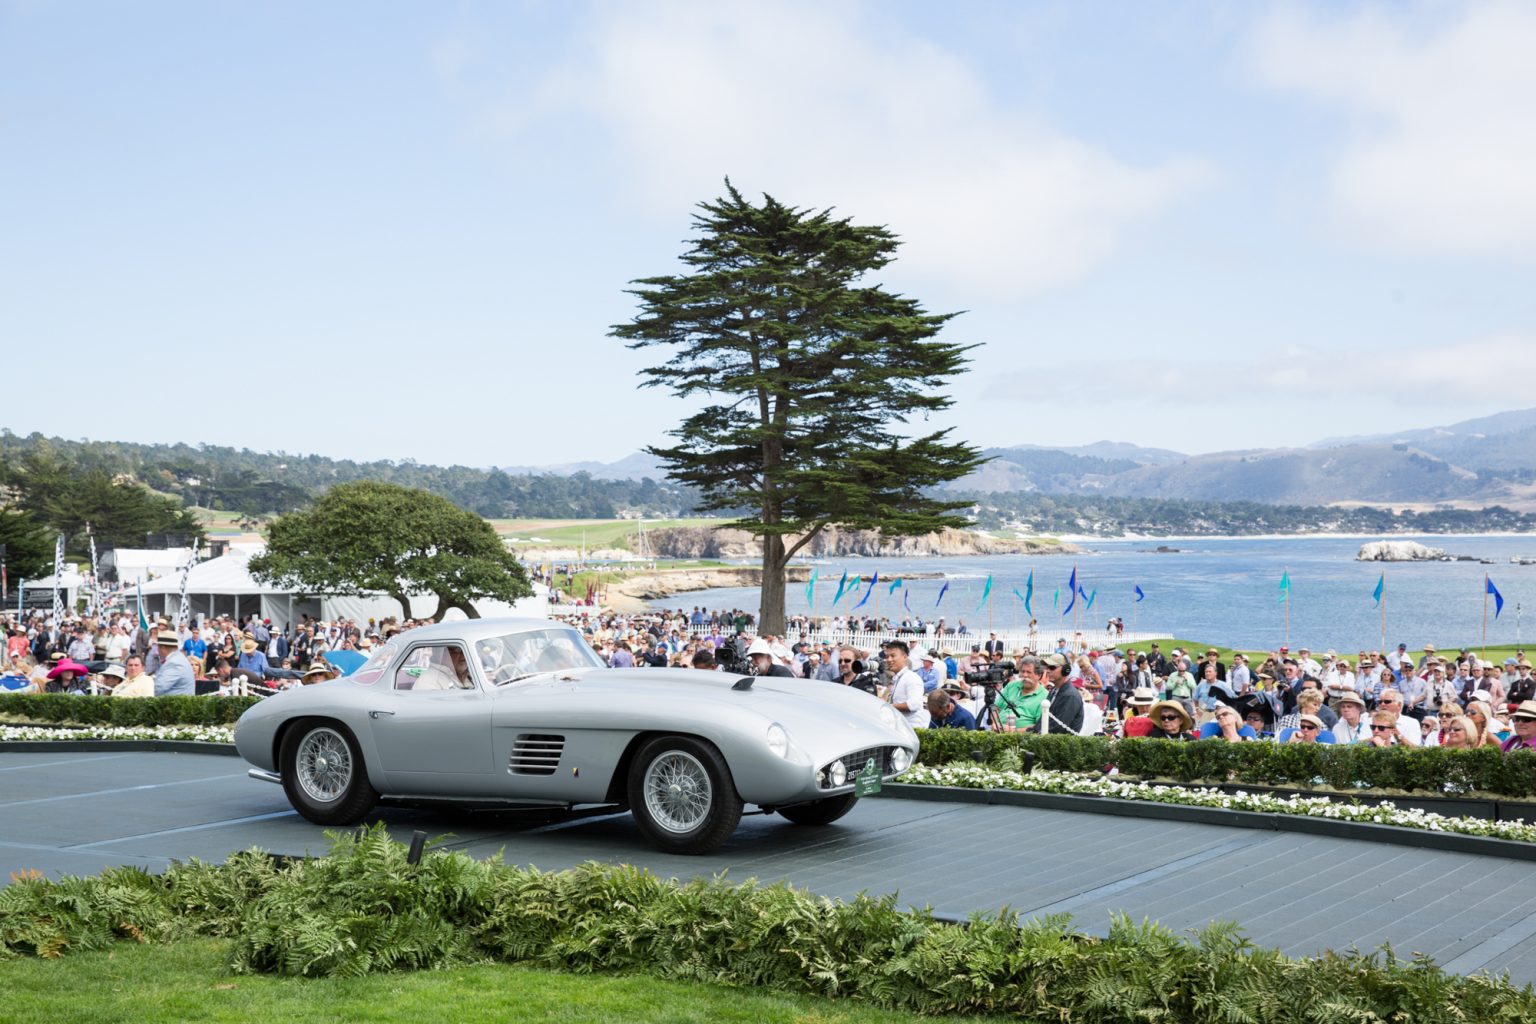 All 68 Best of Show Winners at the Pebble Beach Concours d'Elegance